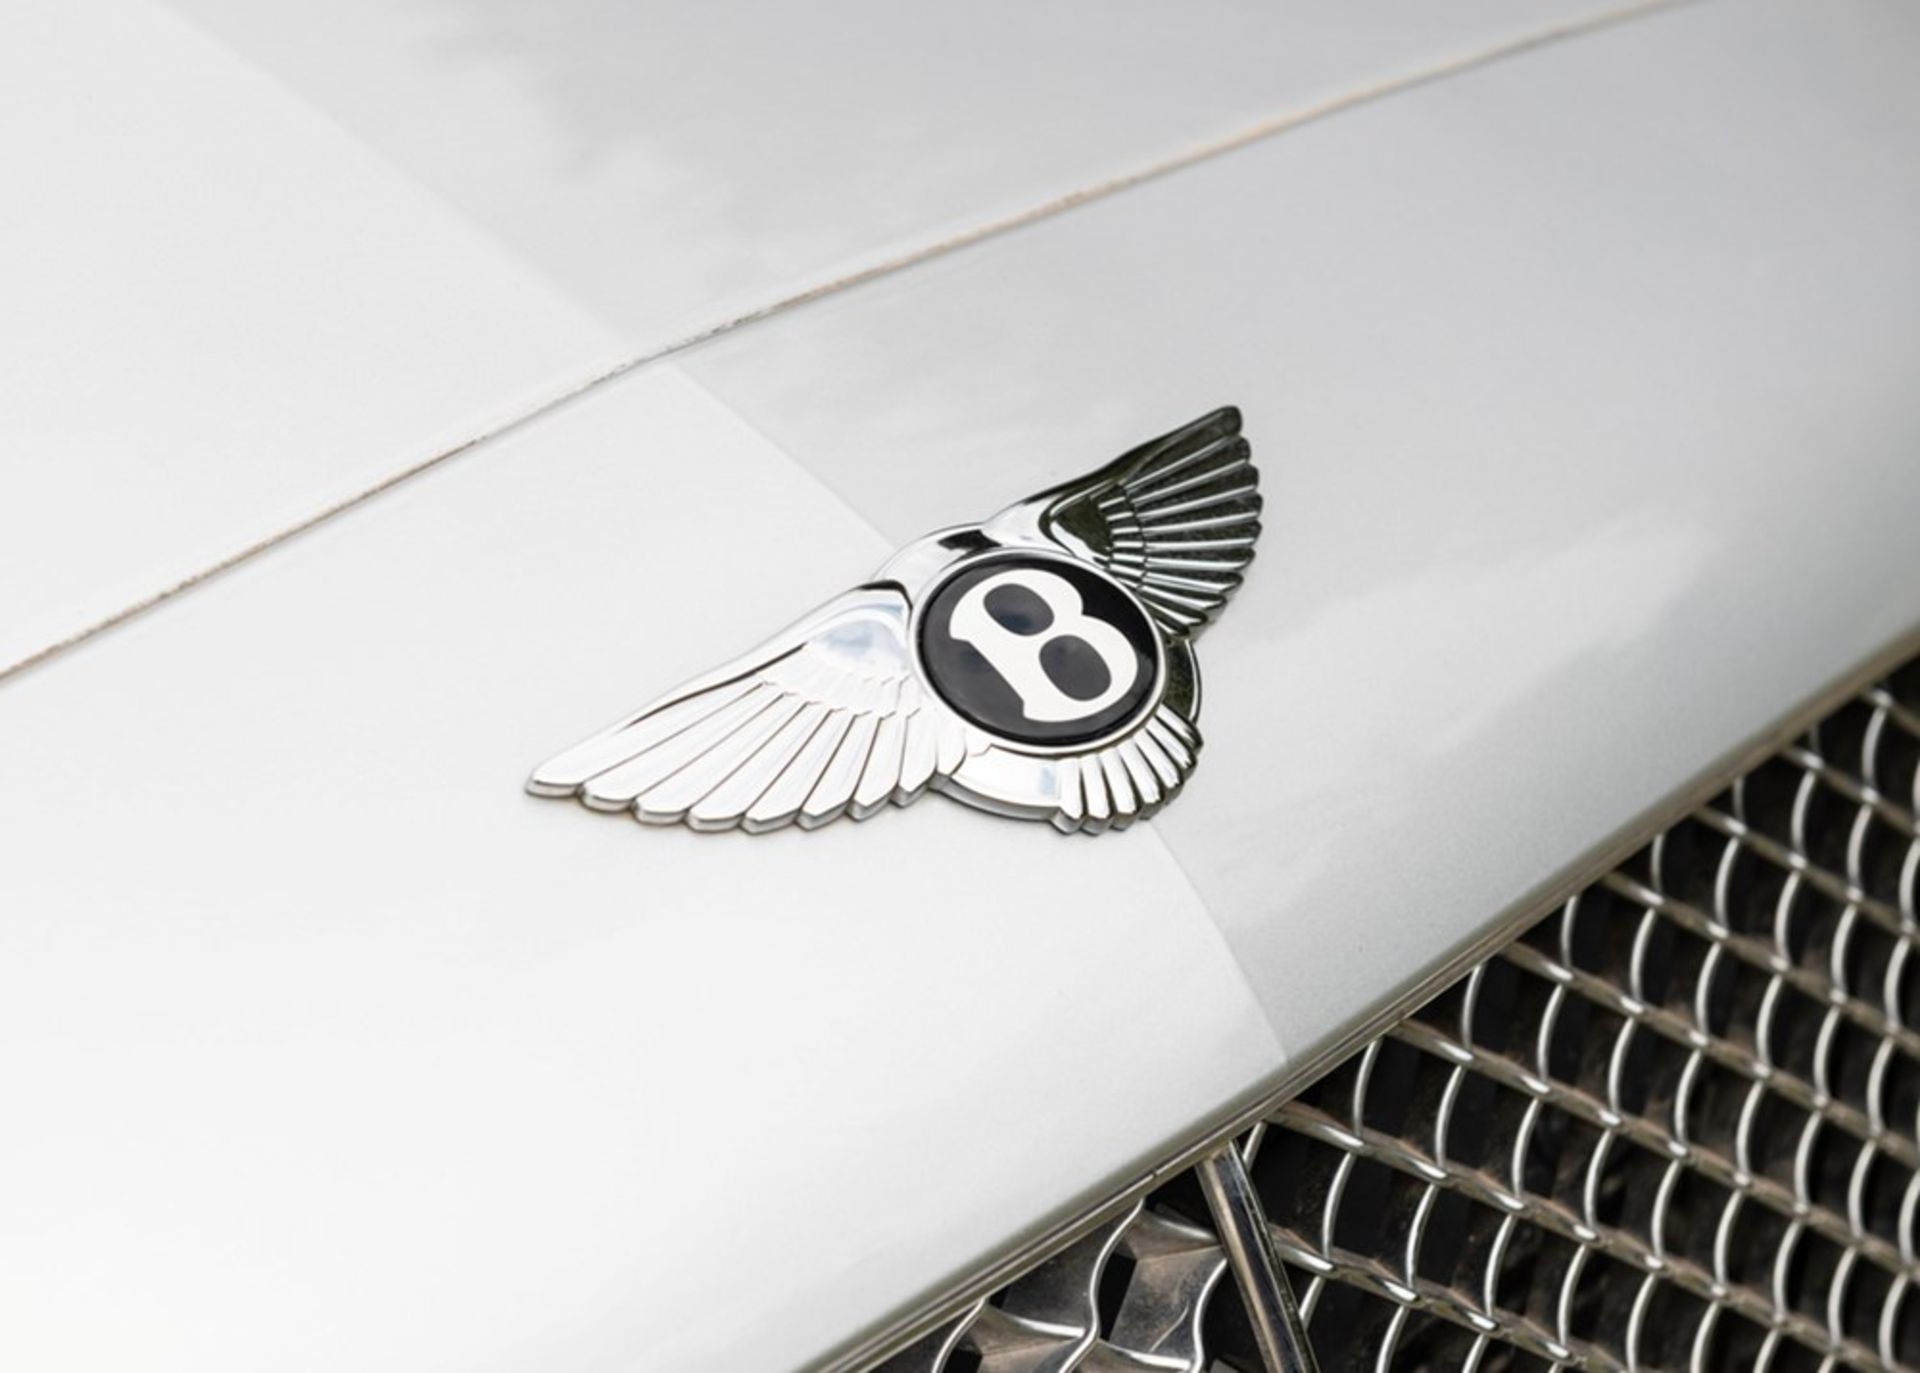 2006 Bentley Continental Flying Spur - Image 6 of 9